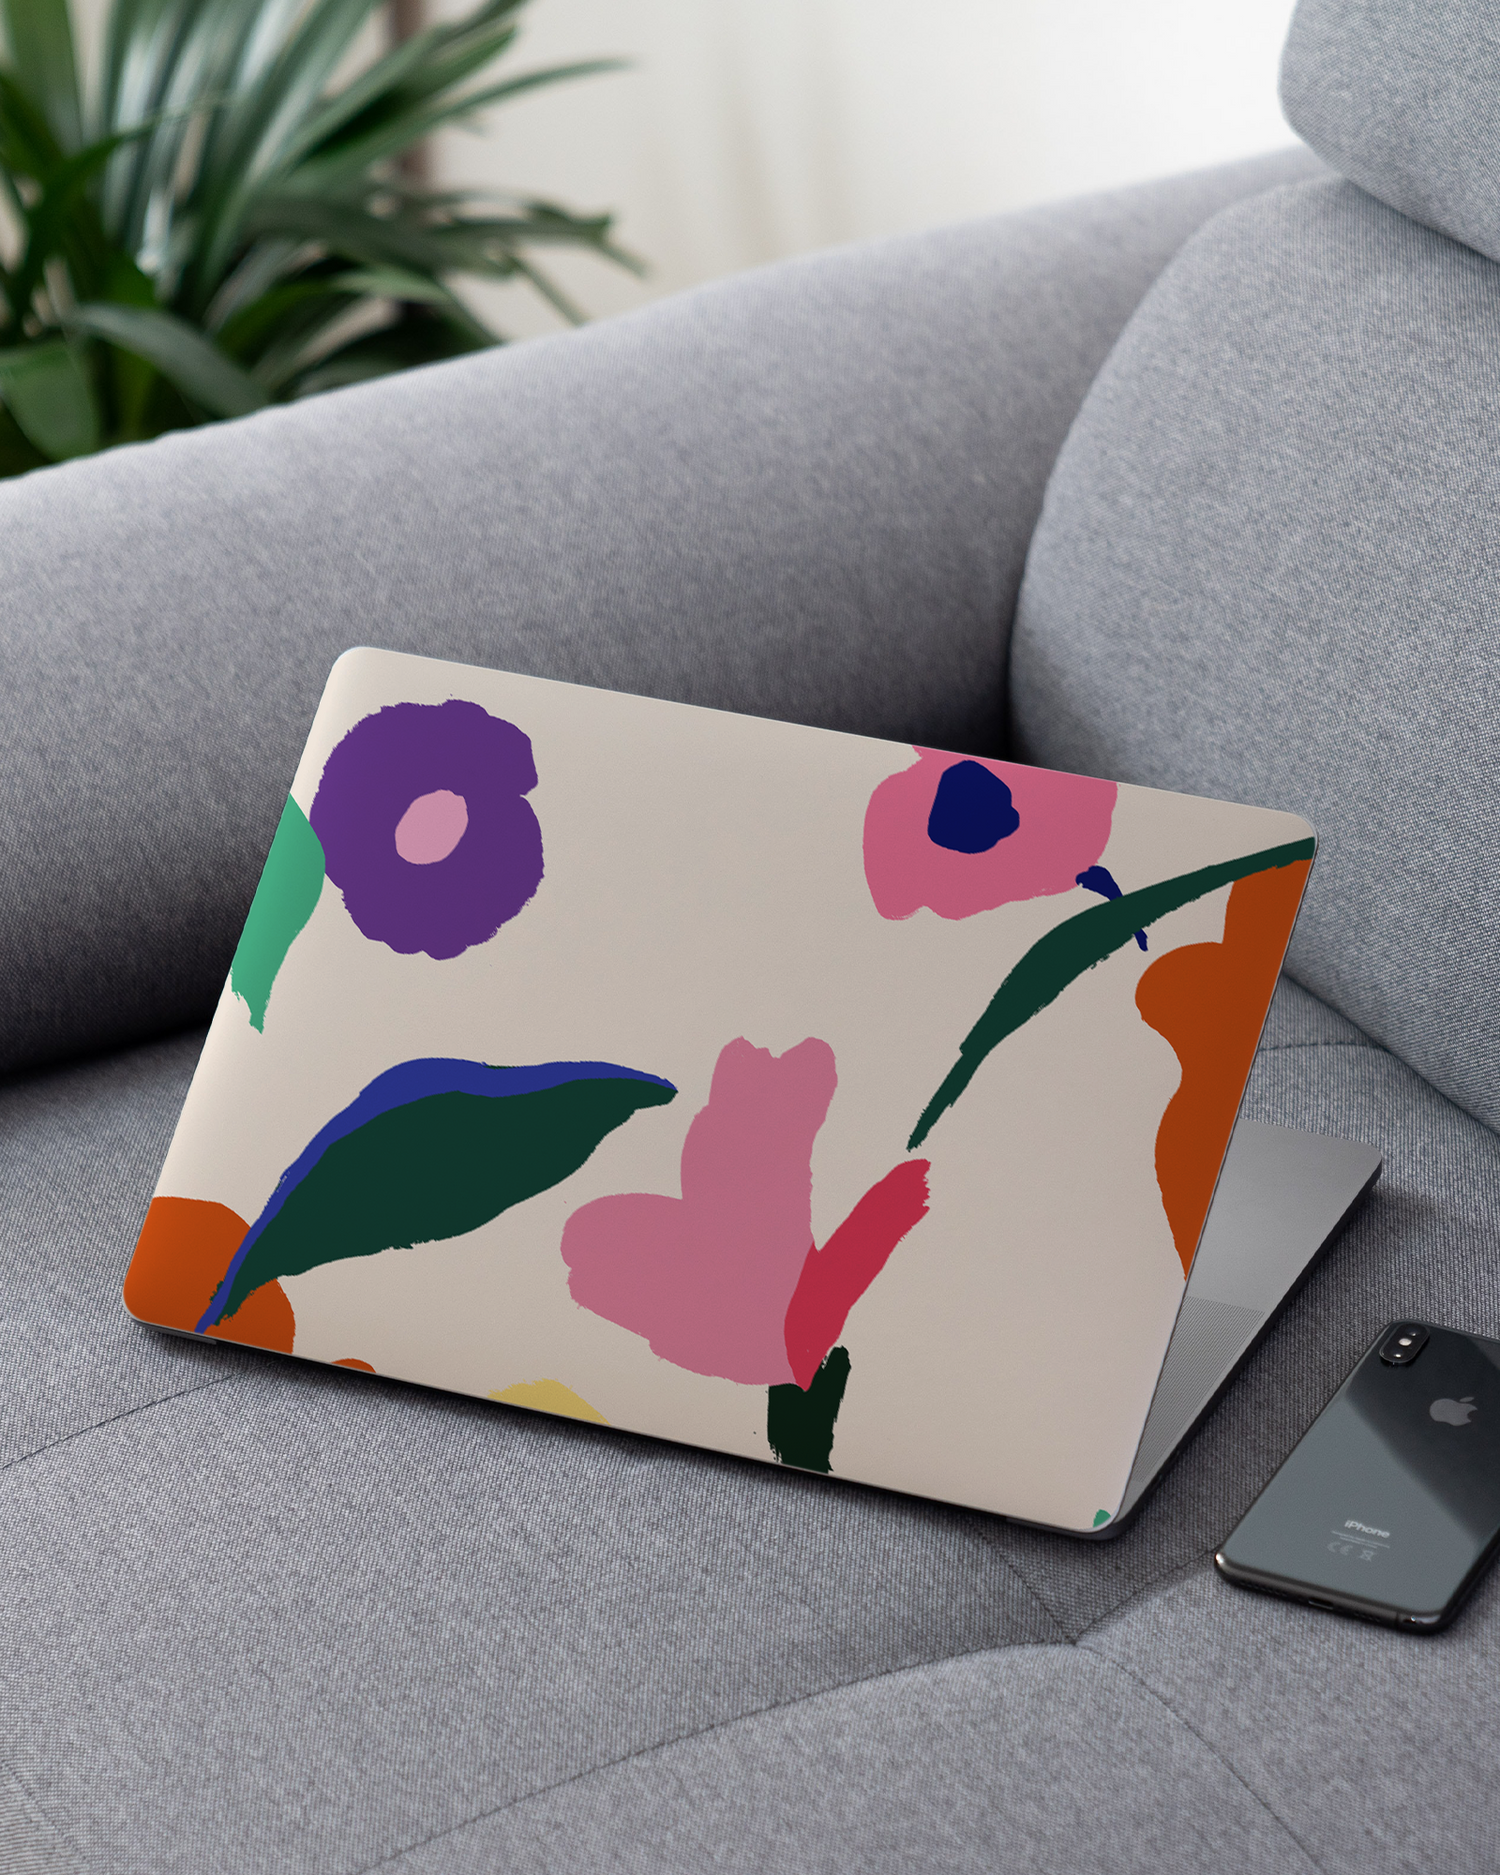 Handpainted Blooms Laptop Skin for 13 inch Apple MacBooks on a couch